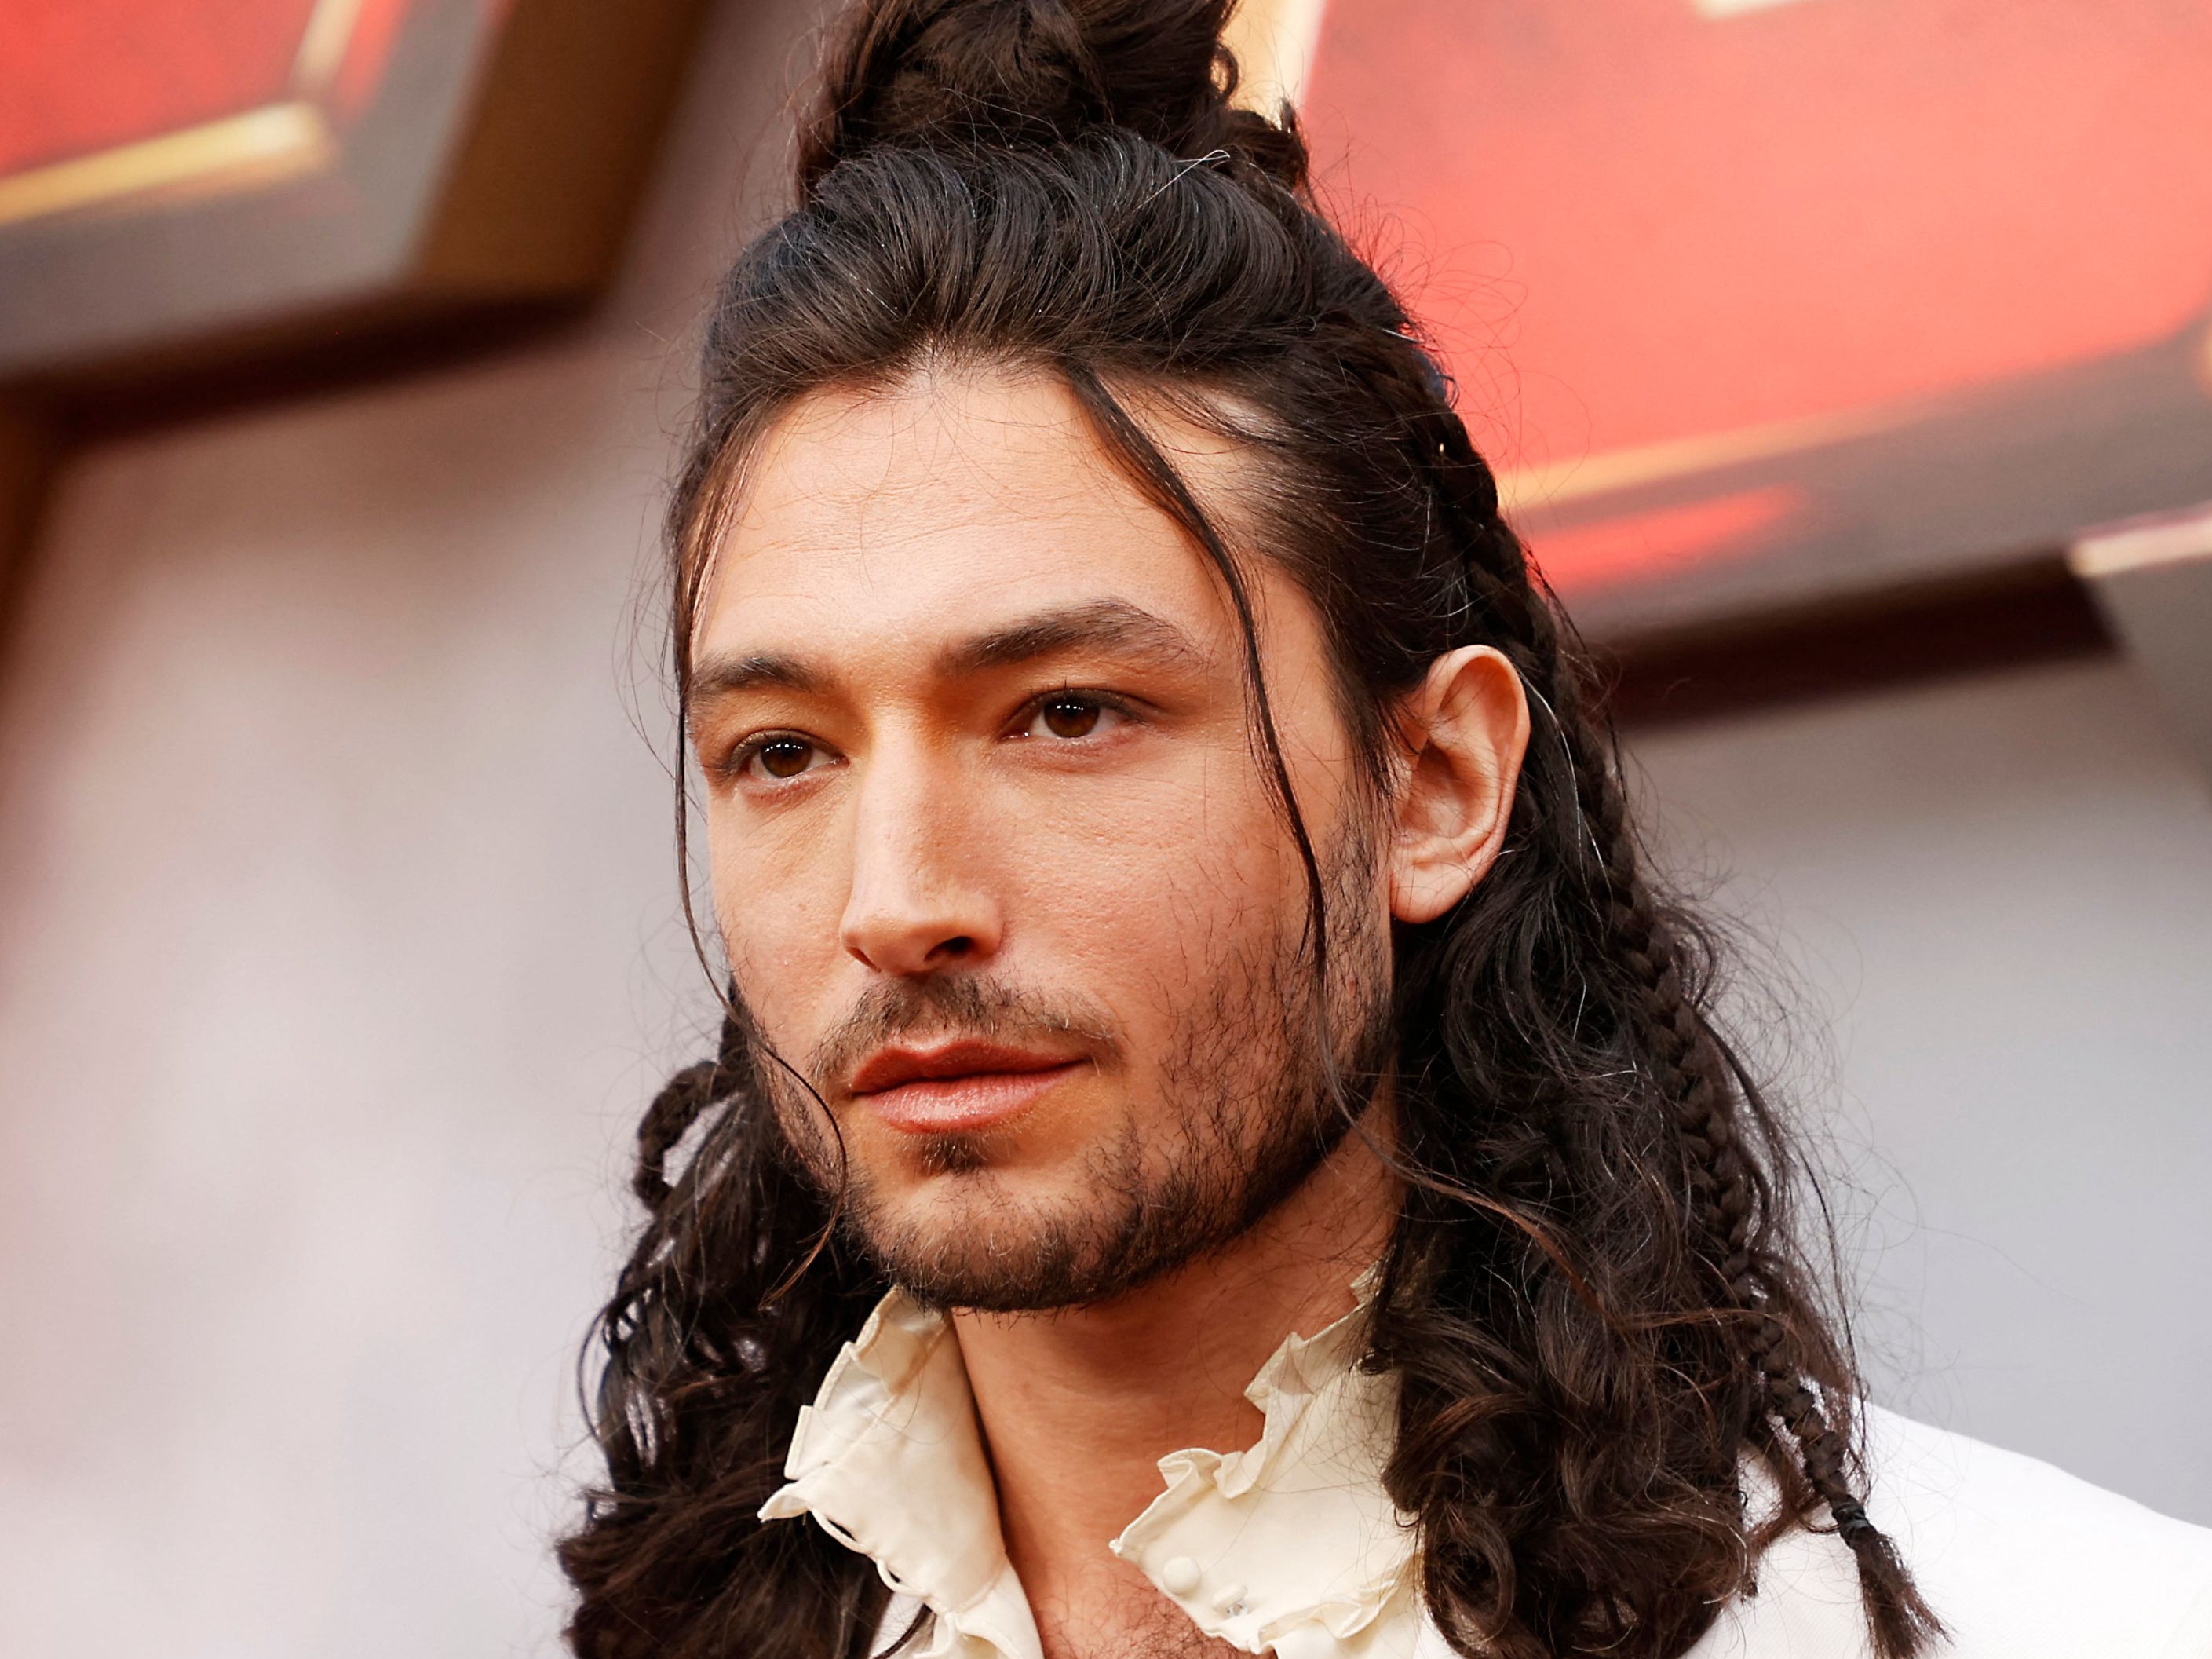 Ezra Miller harassment order lifted as The Flash star accuses media of chasing clicks The Independent